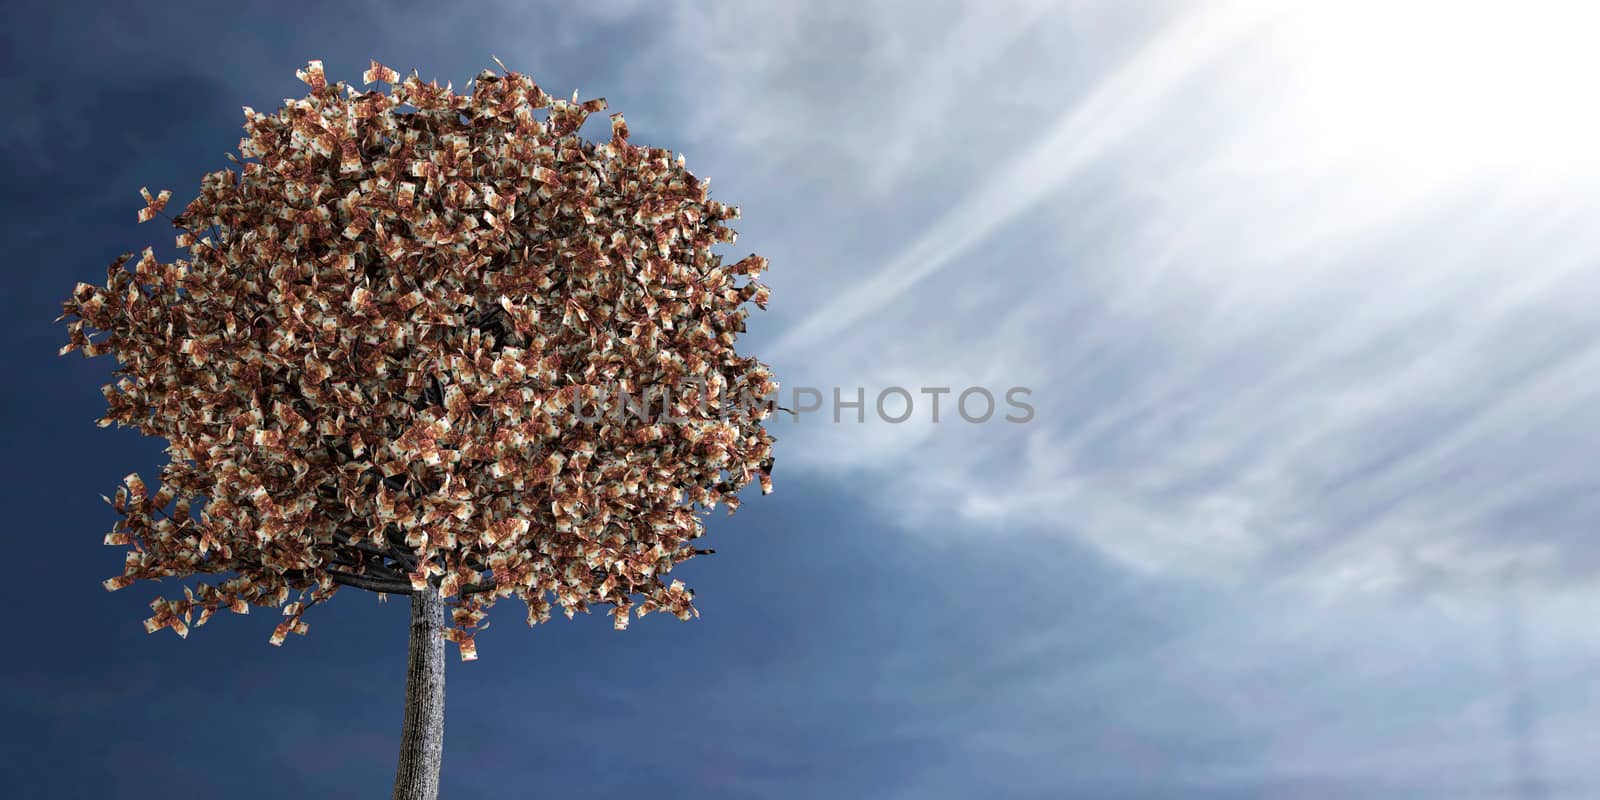 3d rendering of euros growing on a tree in a bright day against blue sky